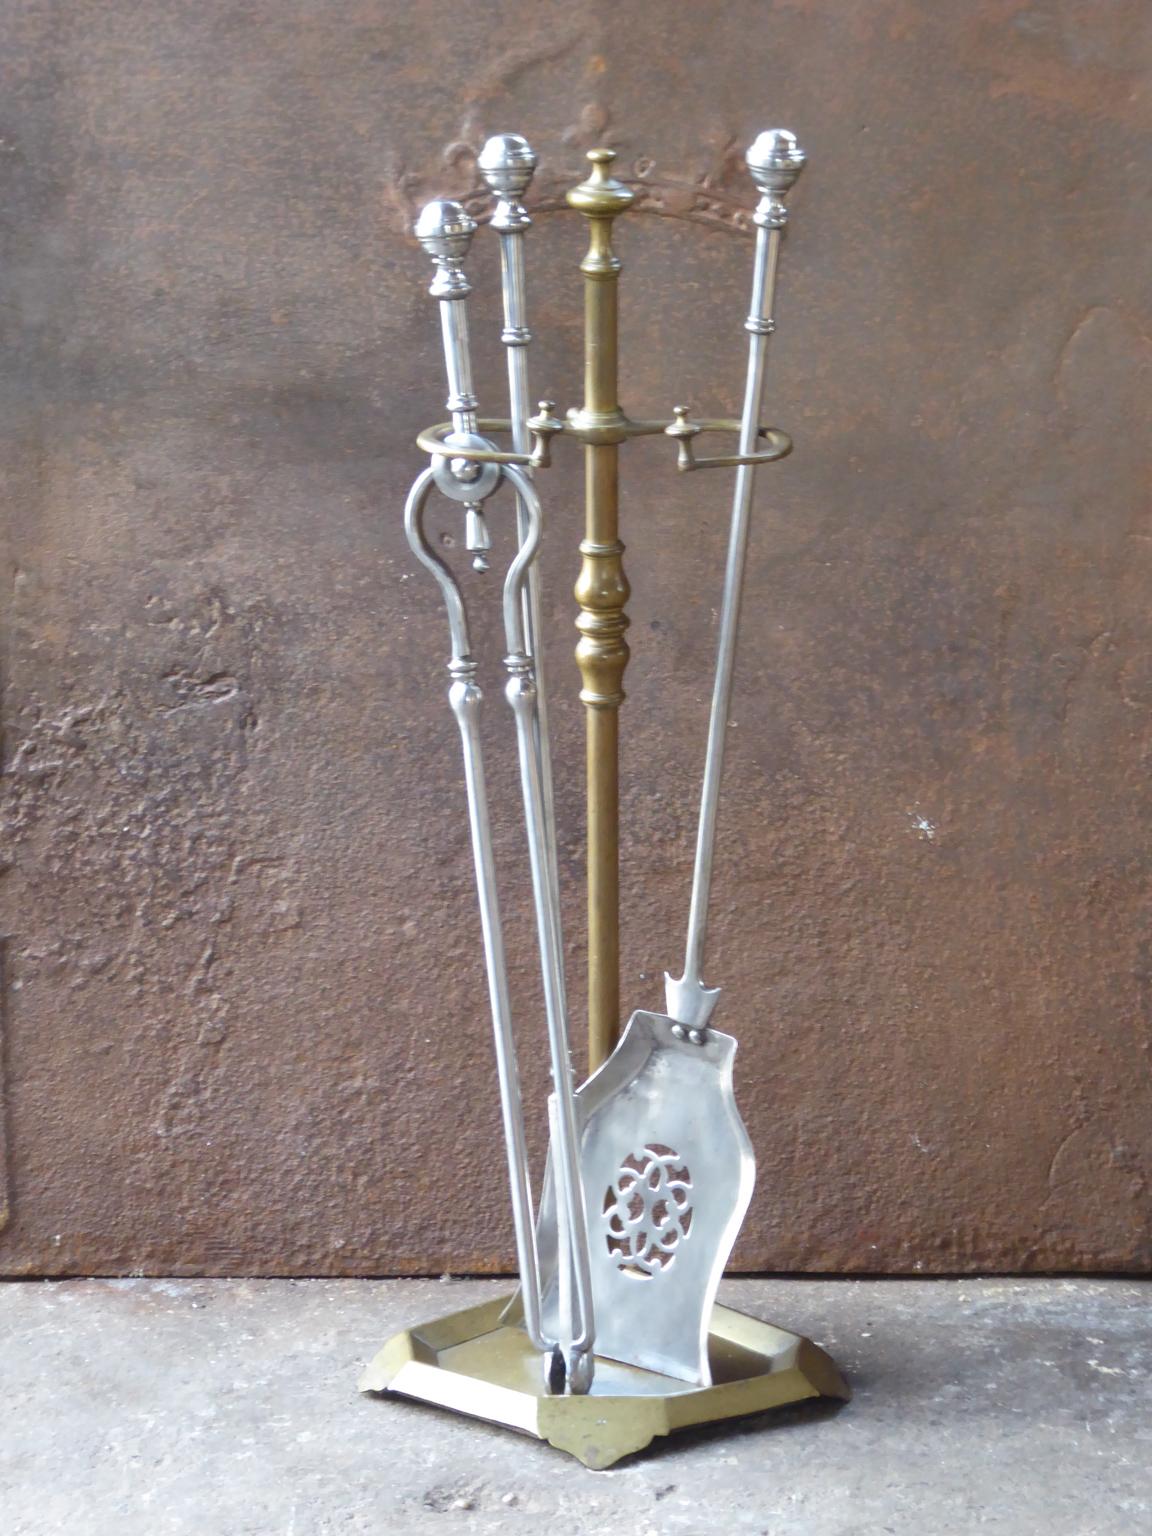 English set of three fireplace tools made of polished steel and with a stand made of brass. The fire tool set is in a good condition and is fully functional. 19th century, Victorian.